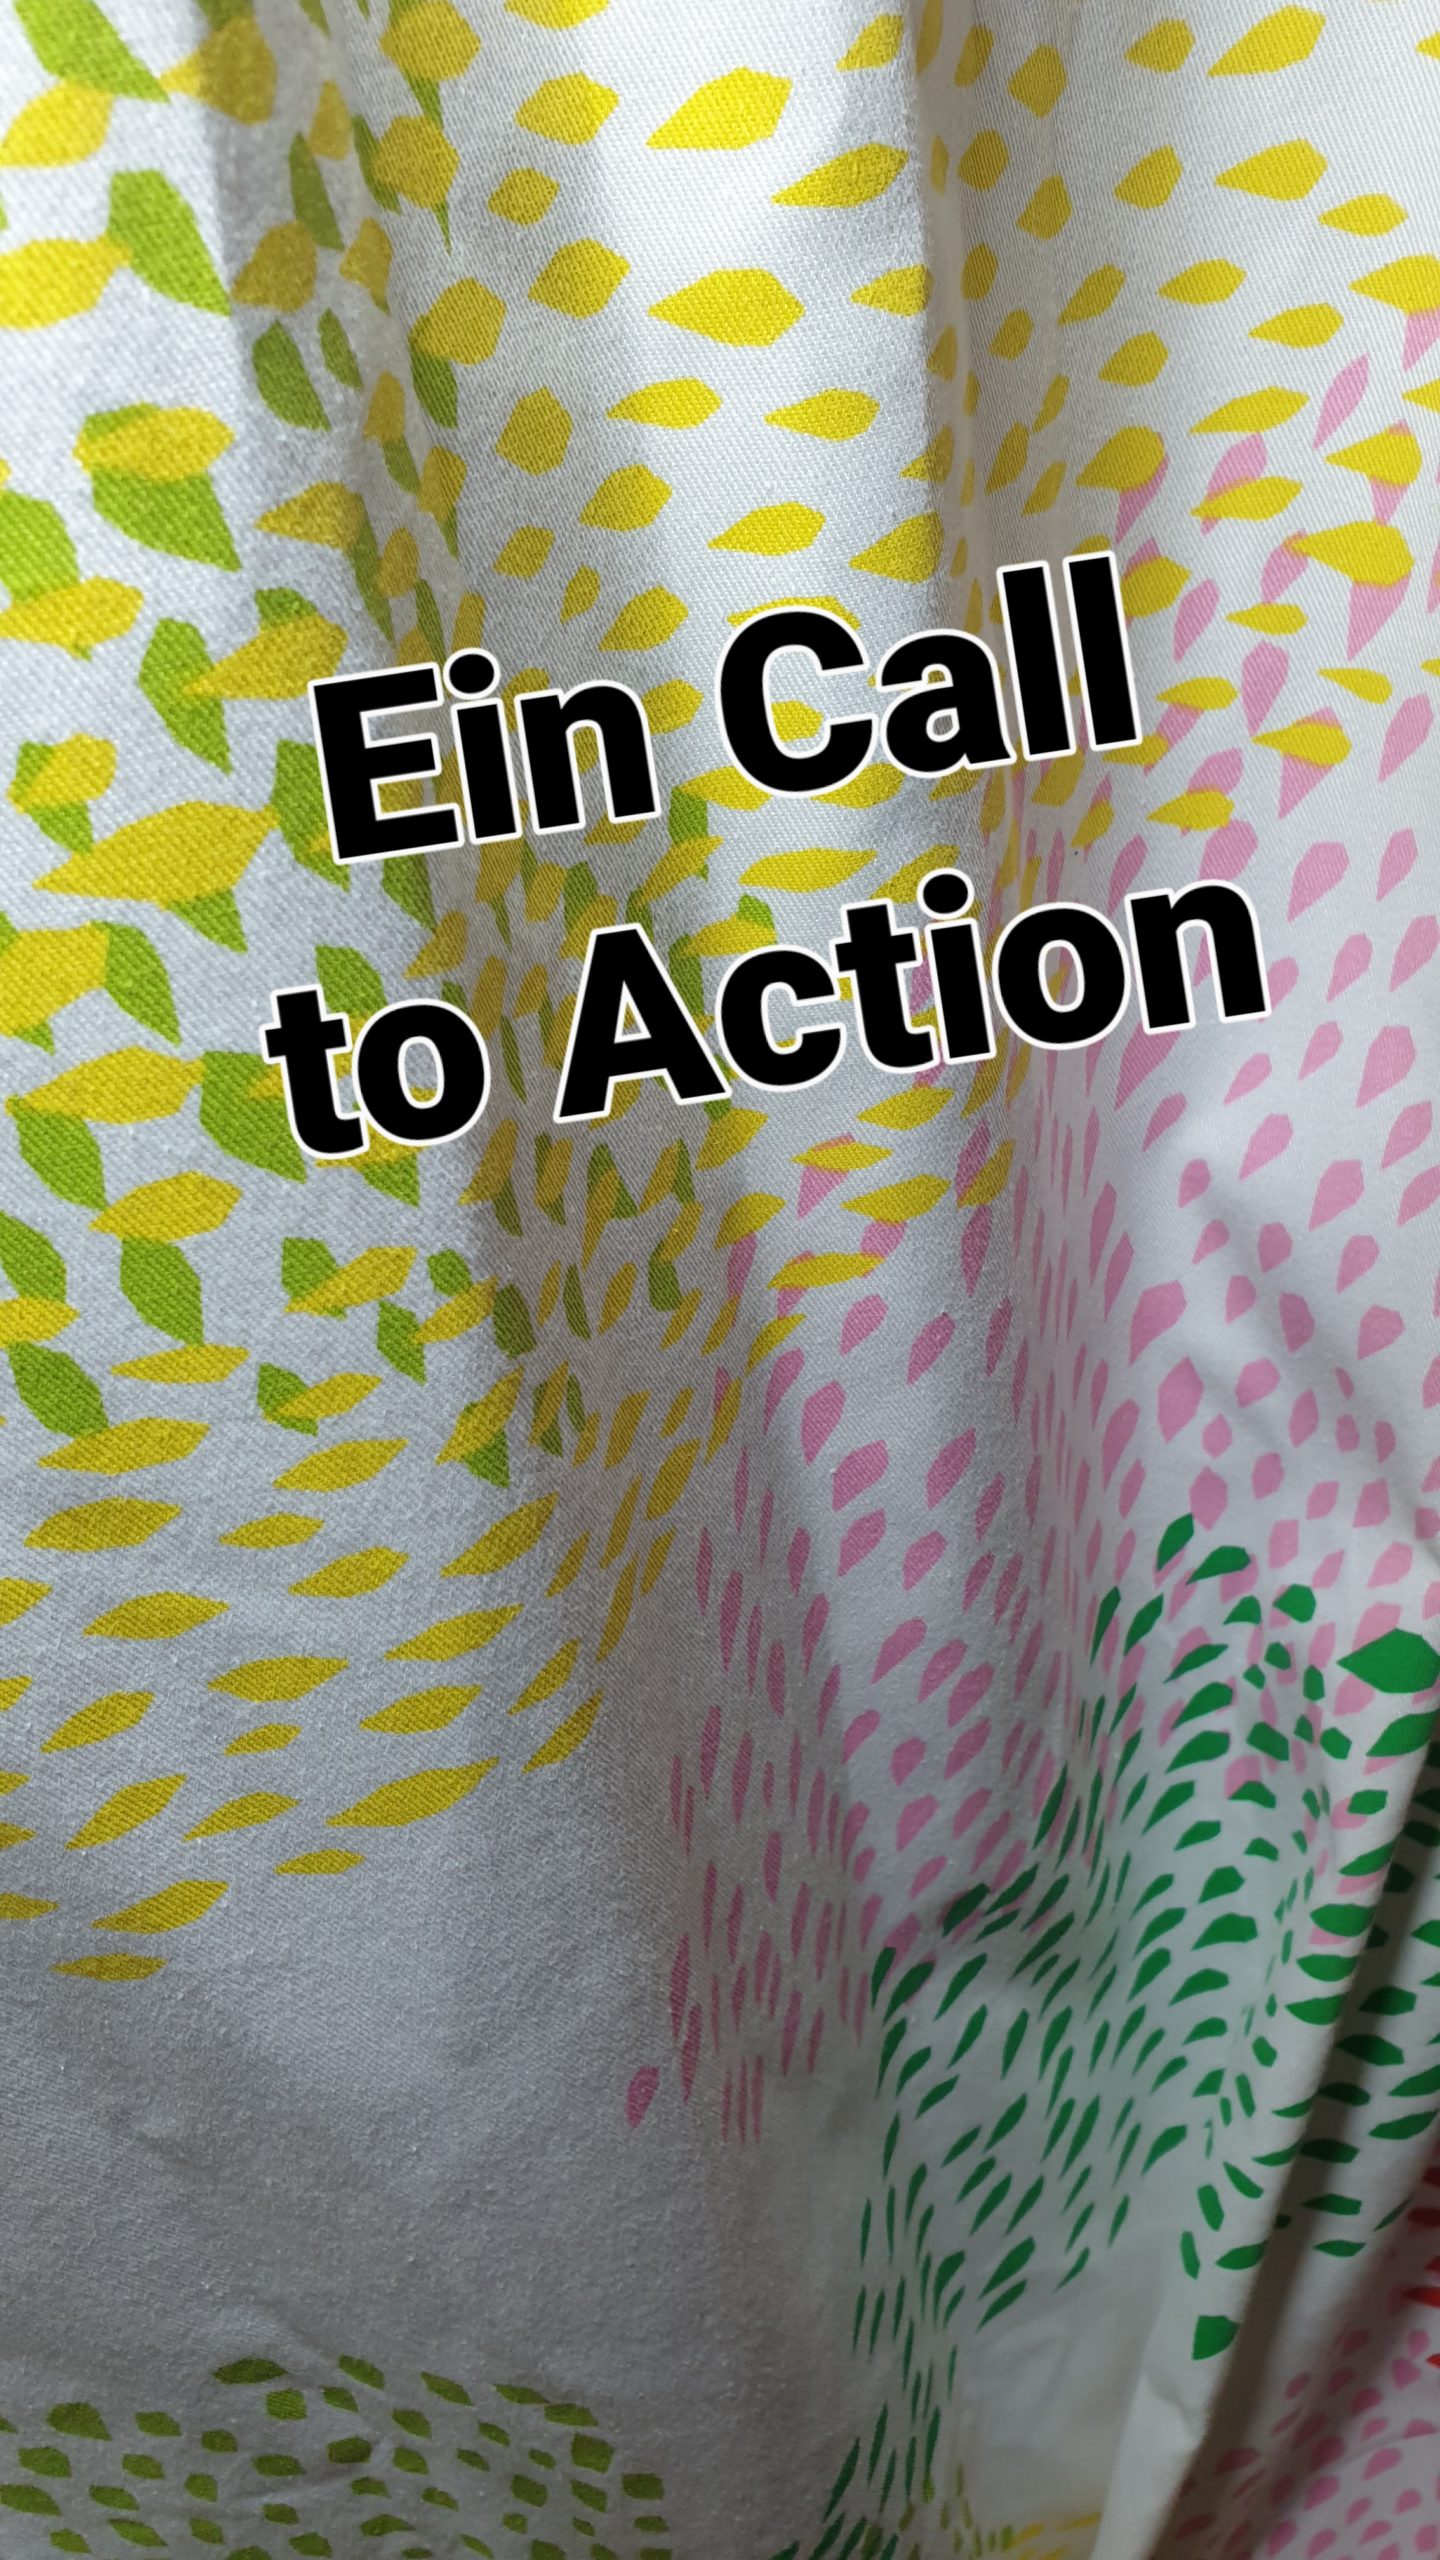 Ein Call to Action